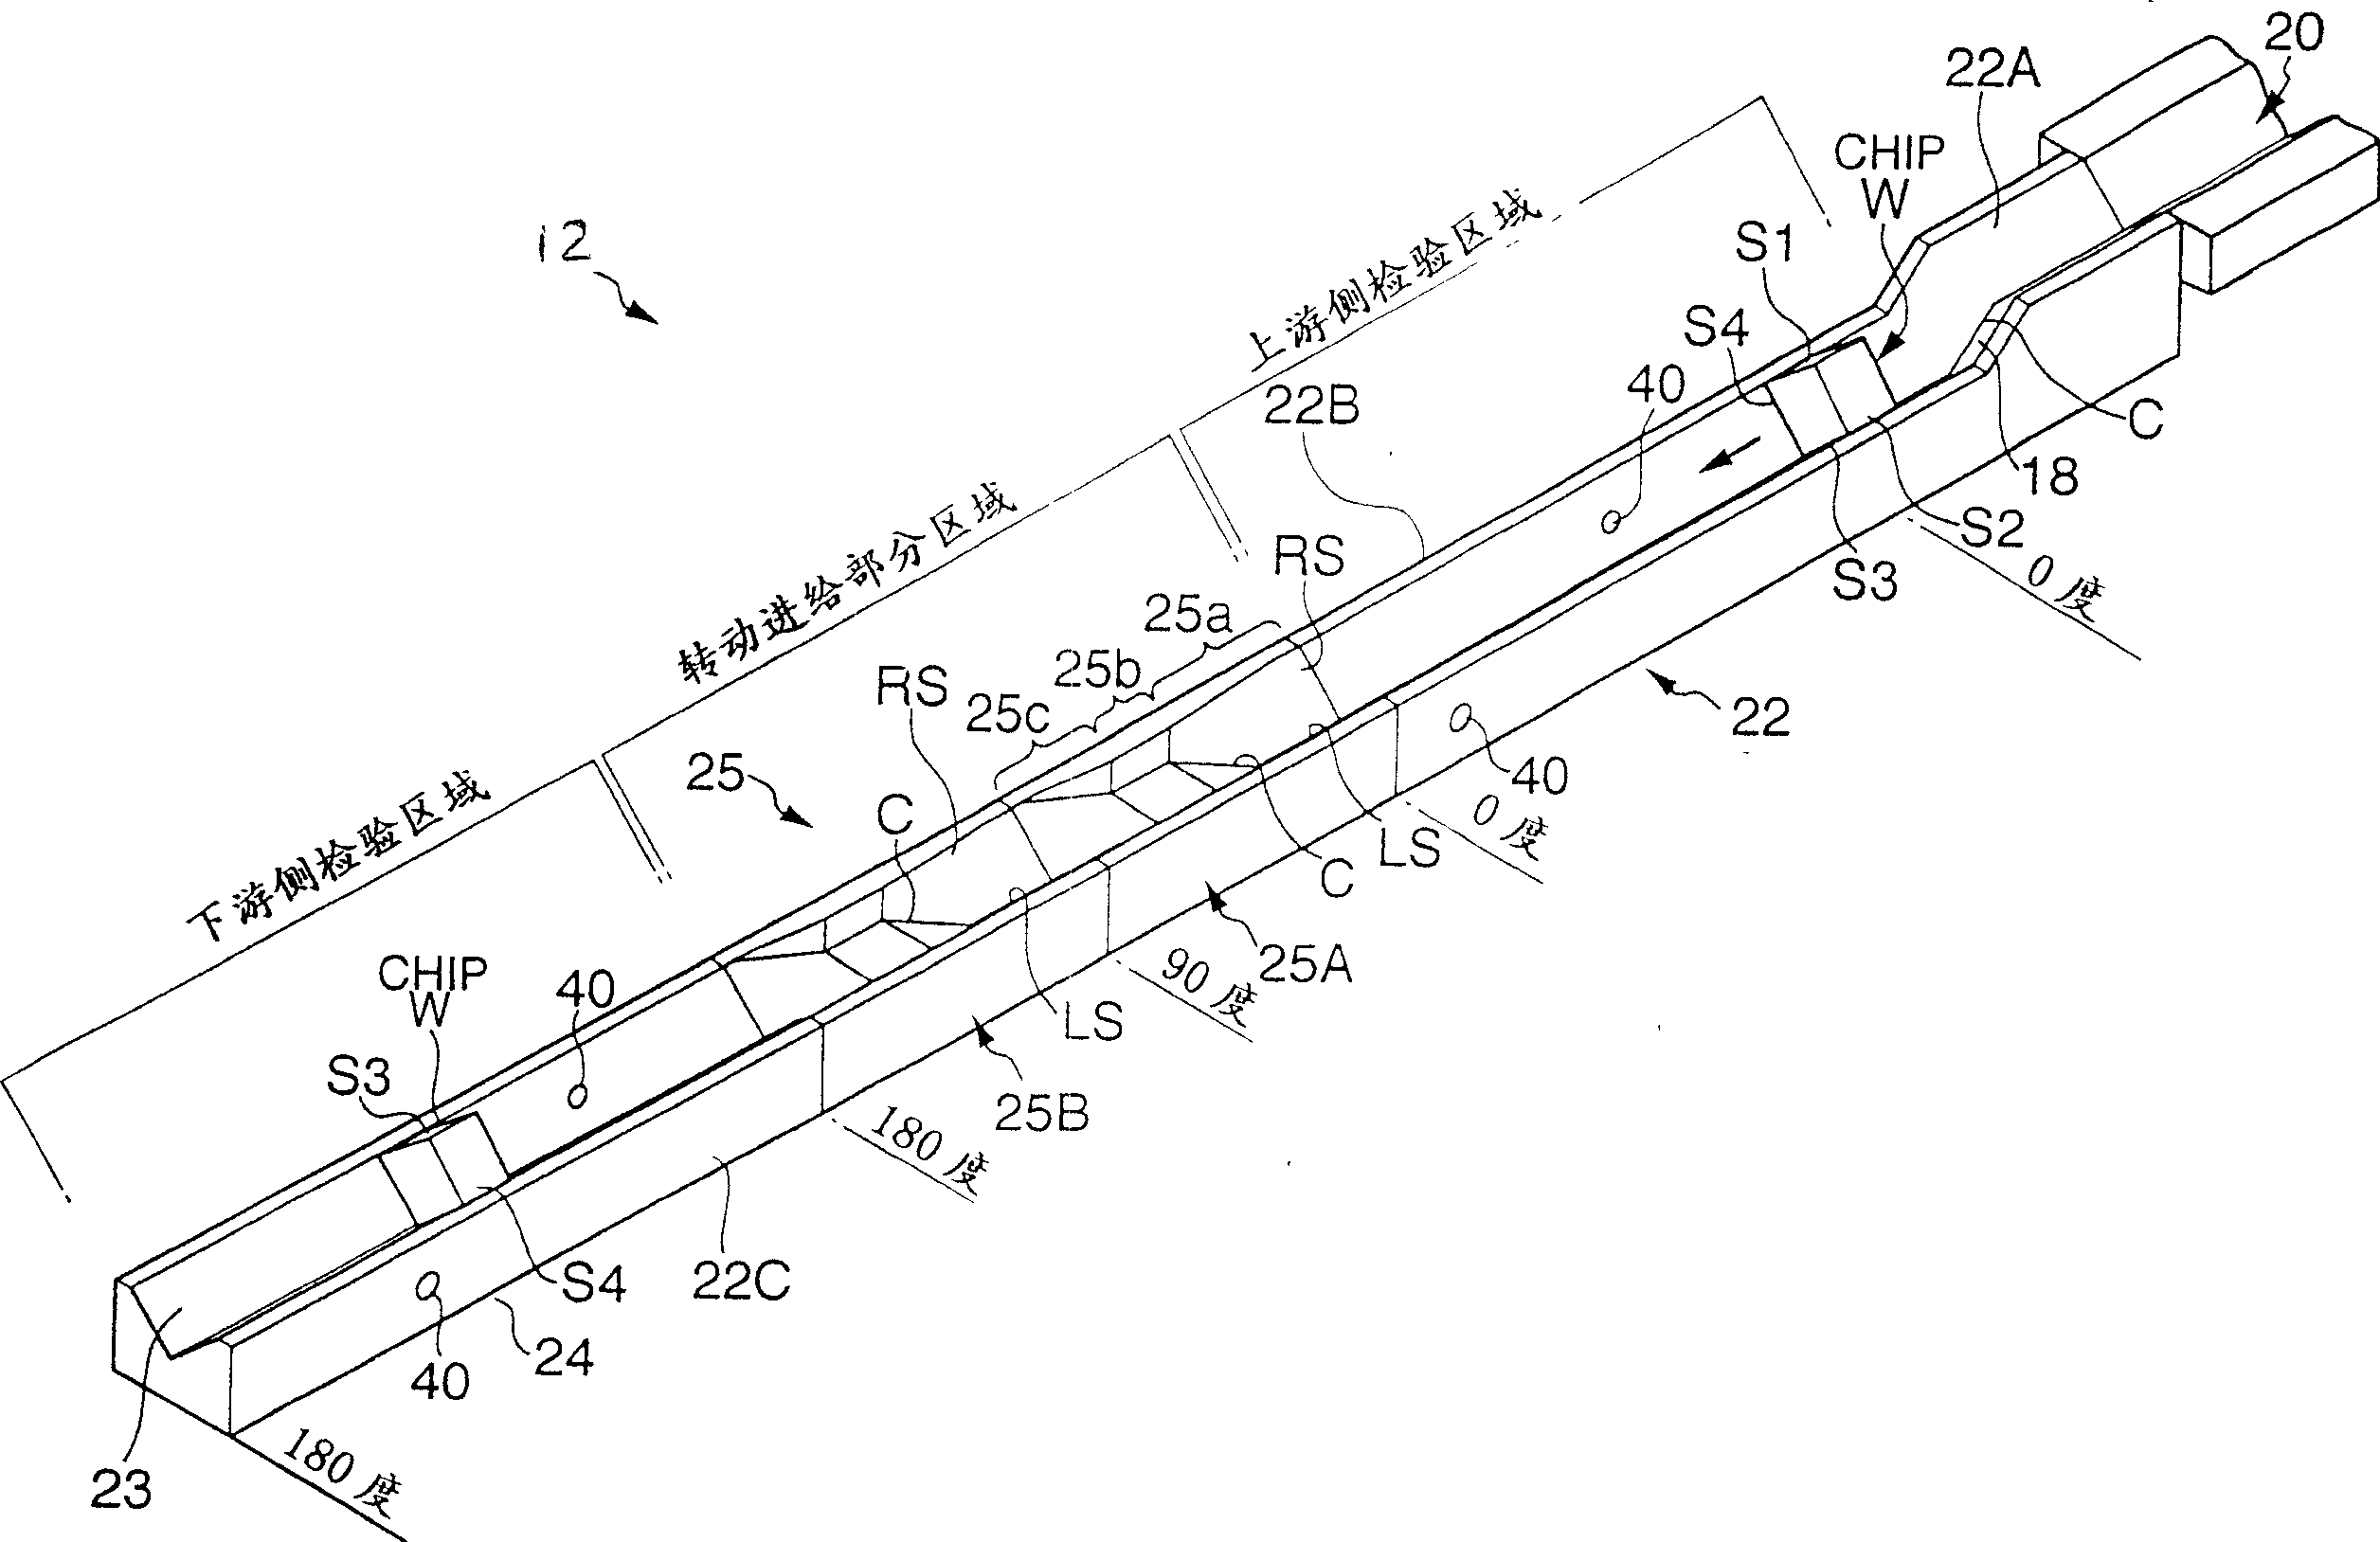 Feeder for polyhedron inspection and polyhedron inspector